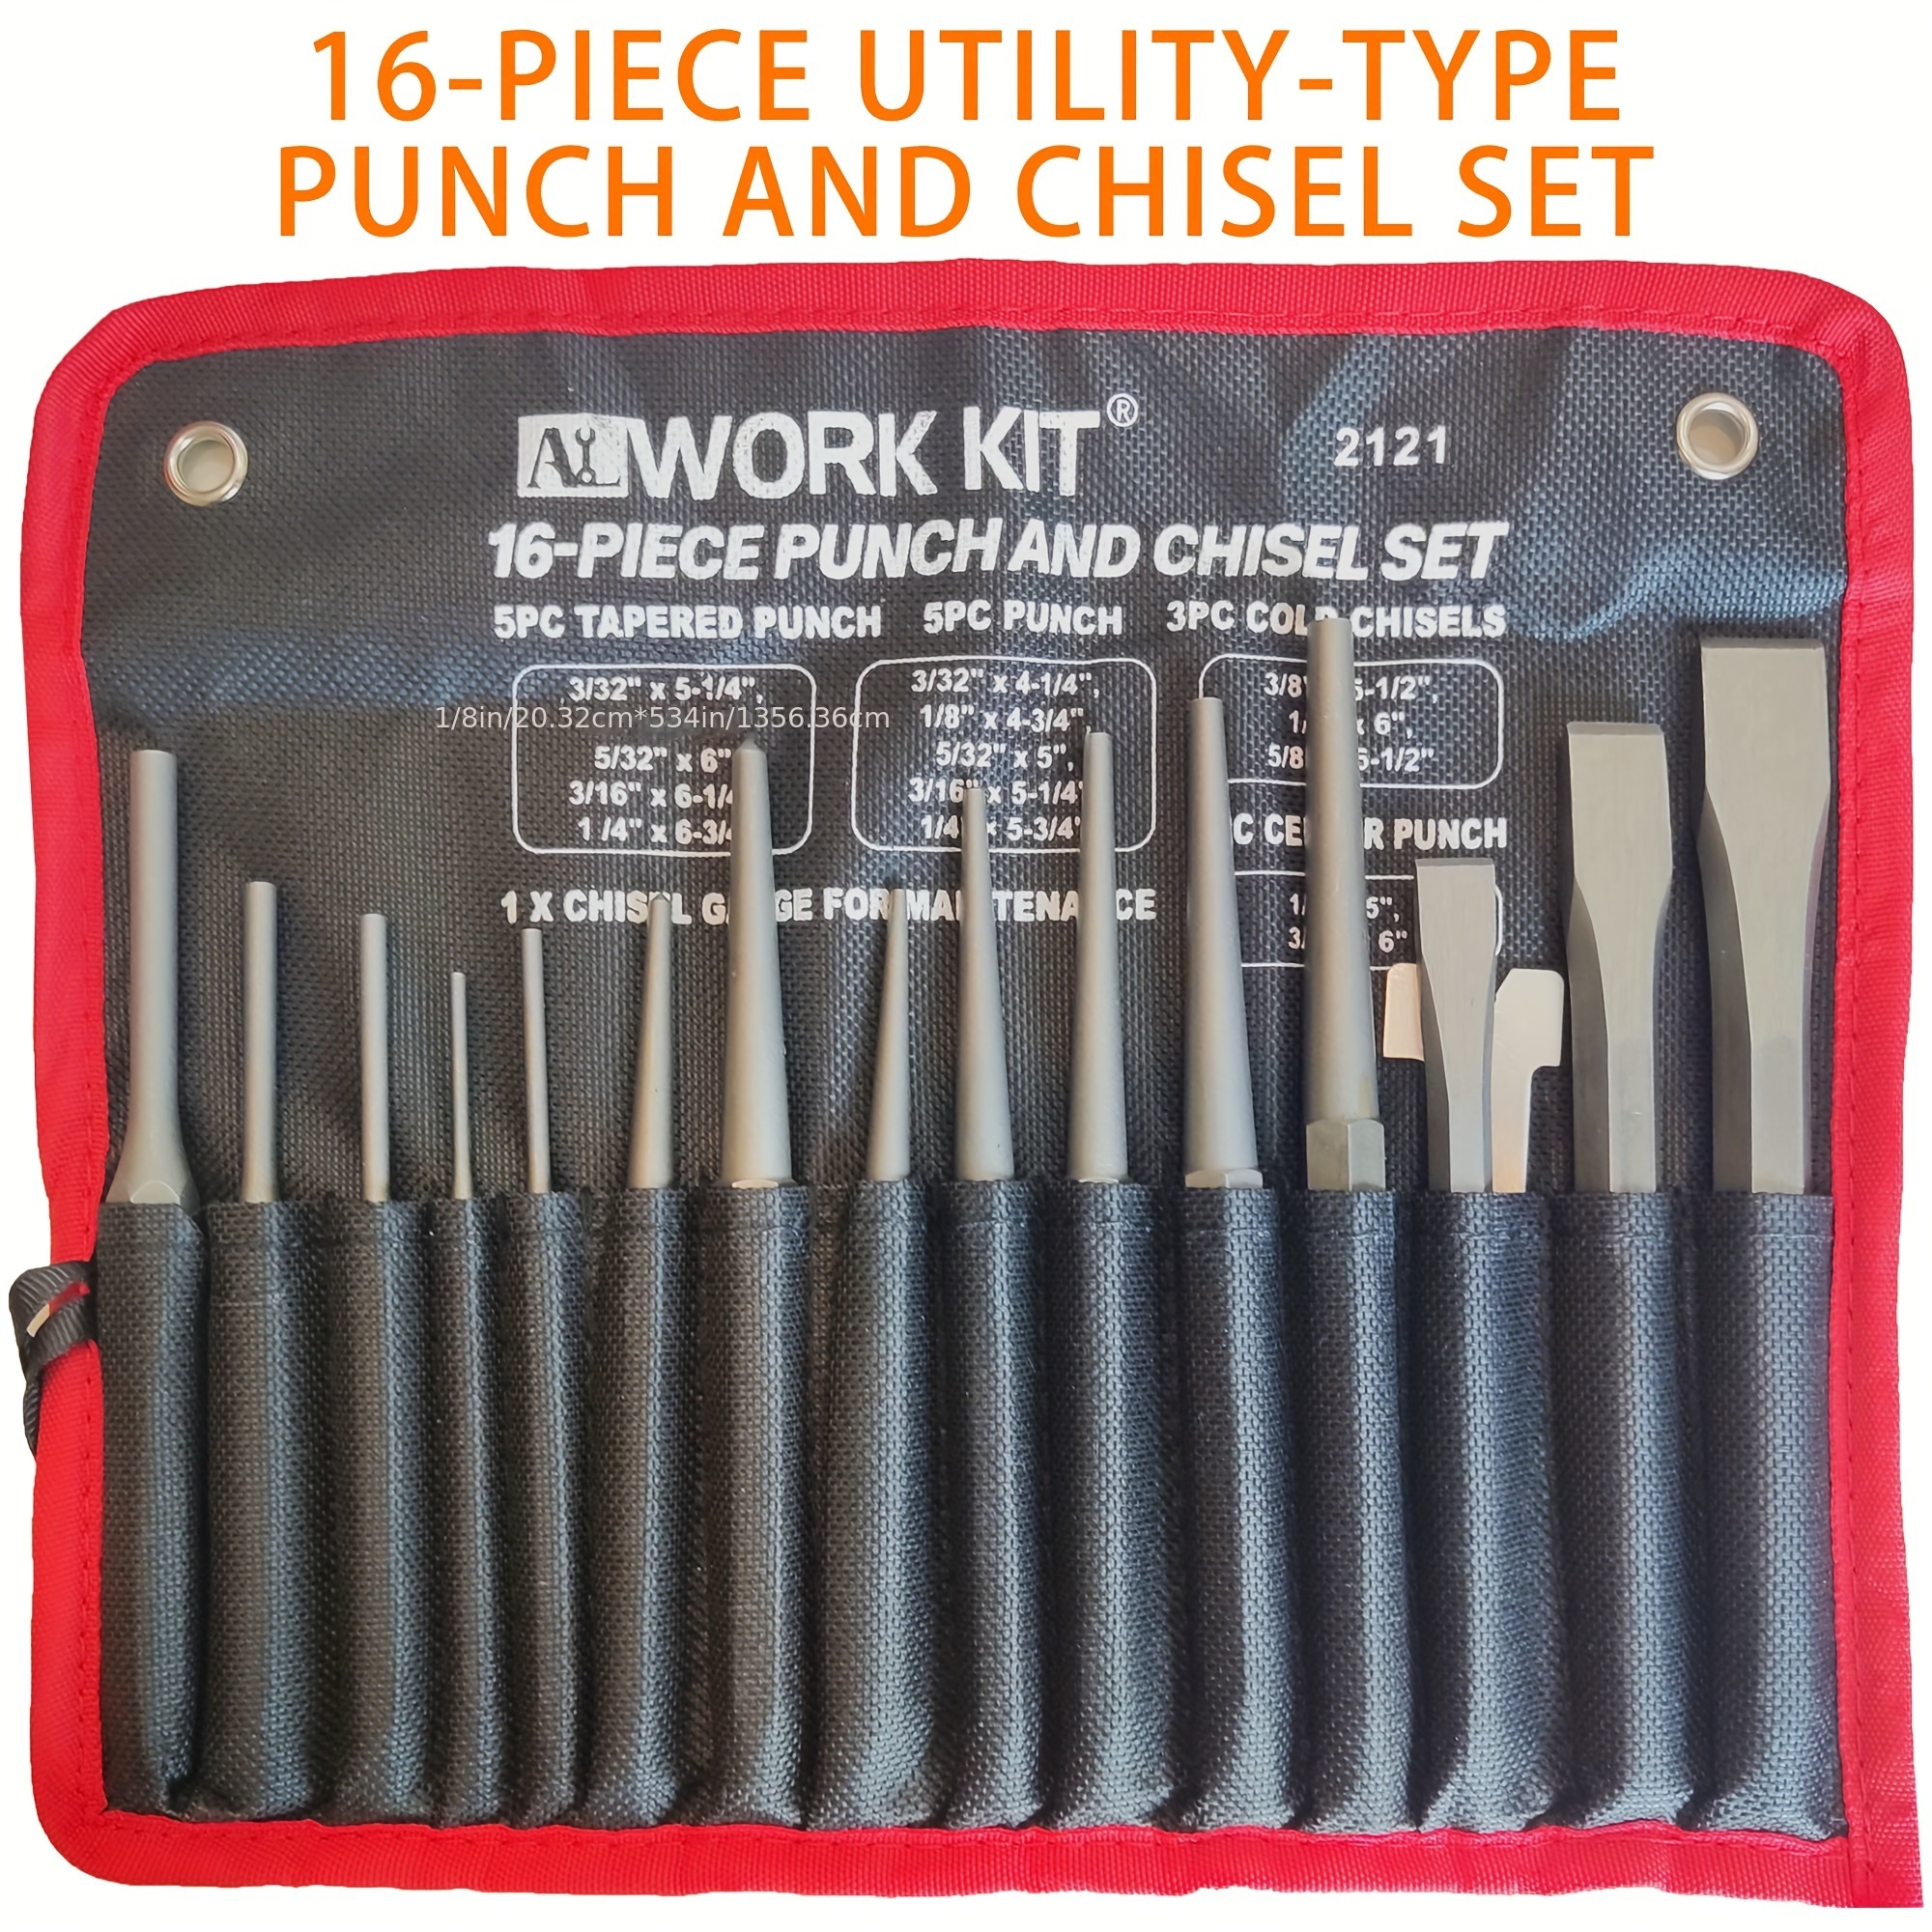 

16-piece Punch & Chisel Set, Including Taper Punch, Cold Chisels, Pin Punch, Center Punch, Cr-v Steel Manufacturing, Nice Gifts